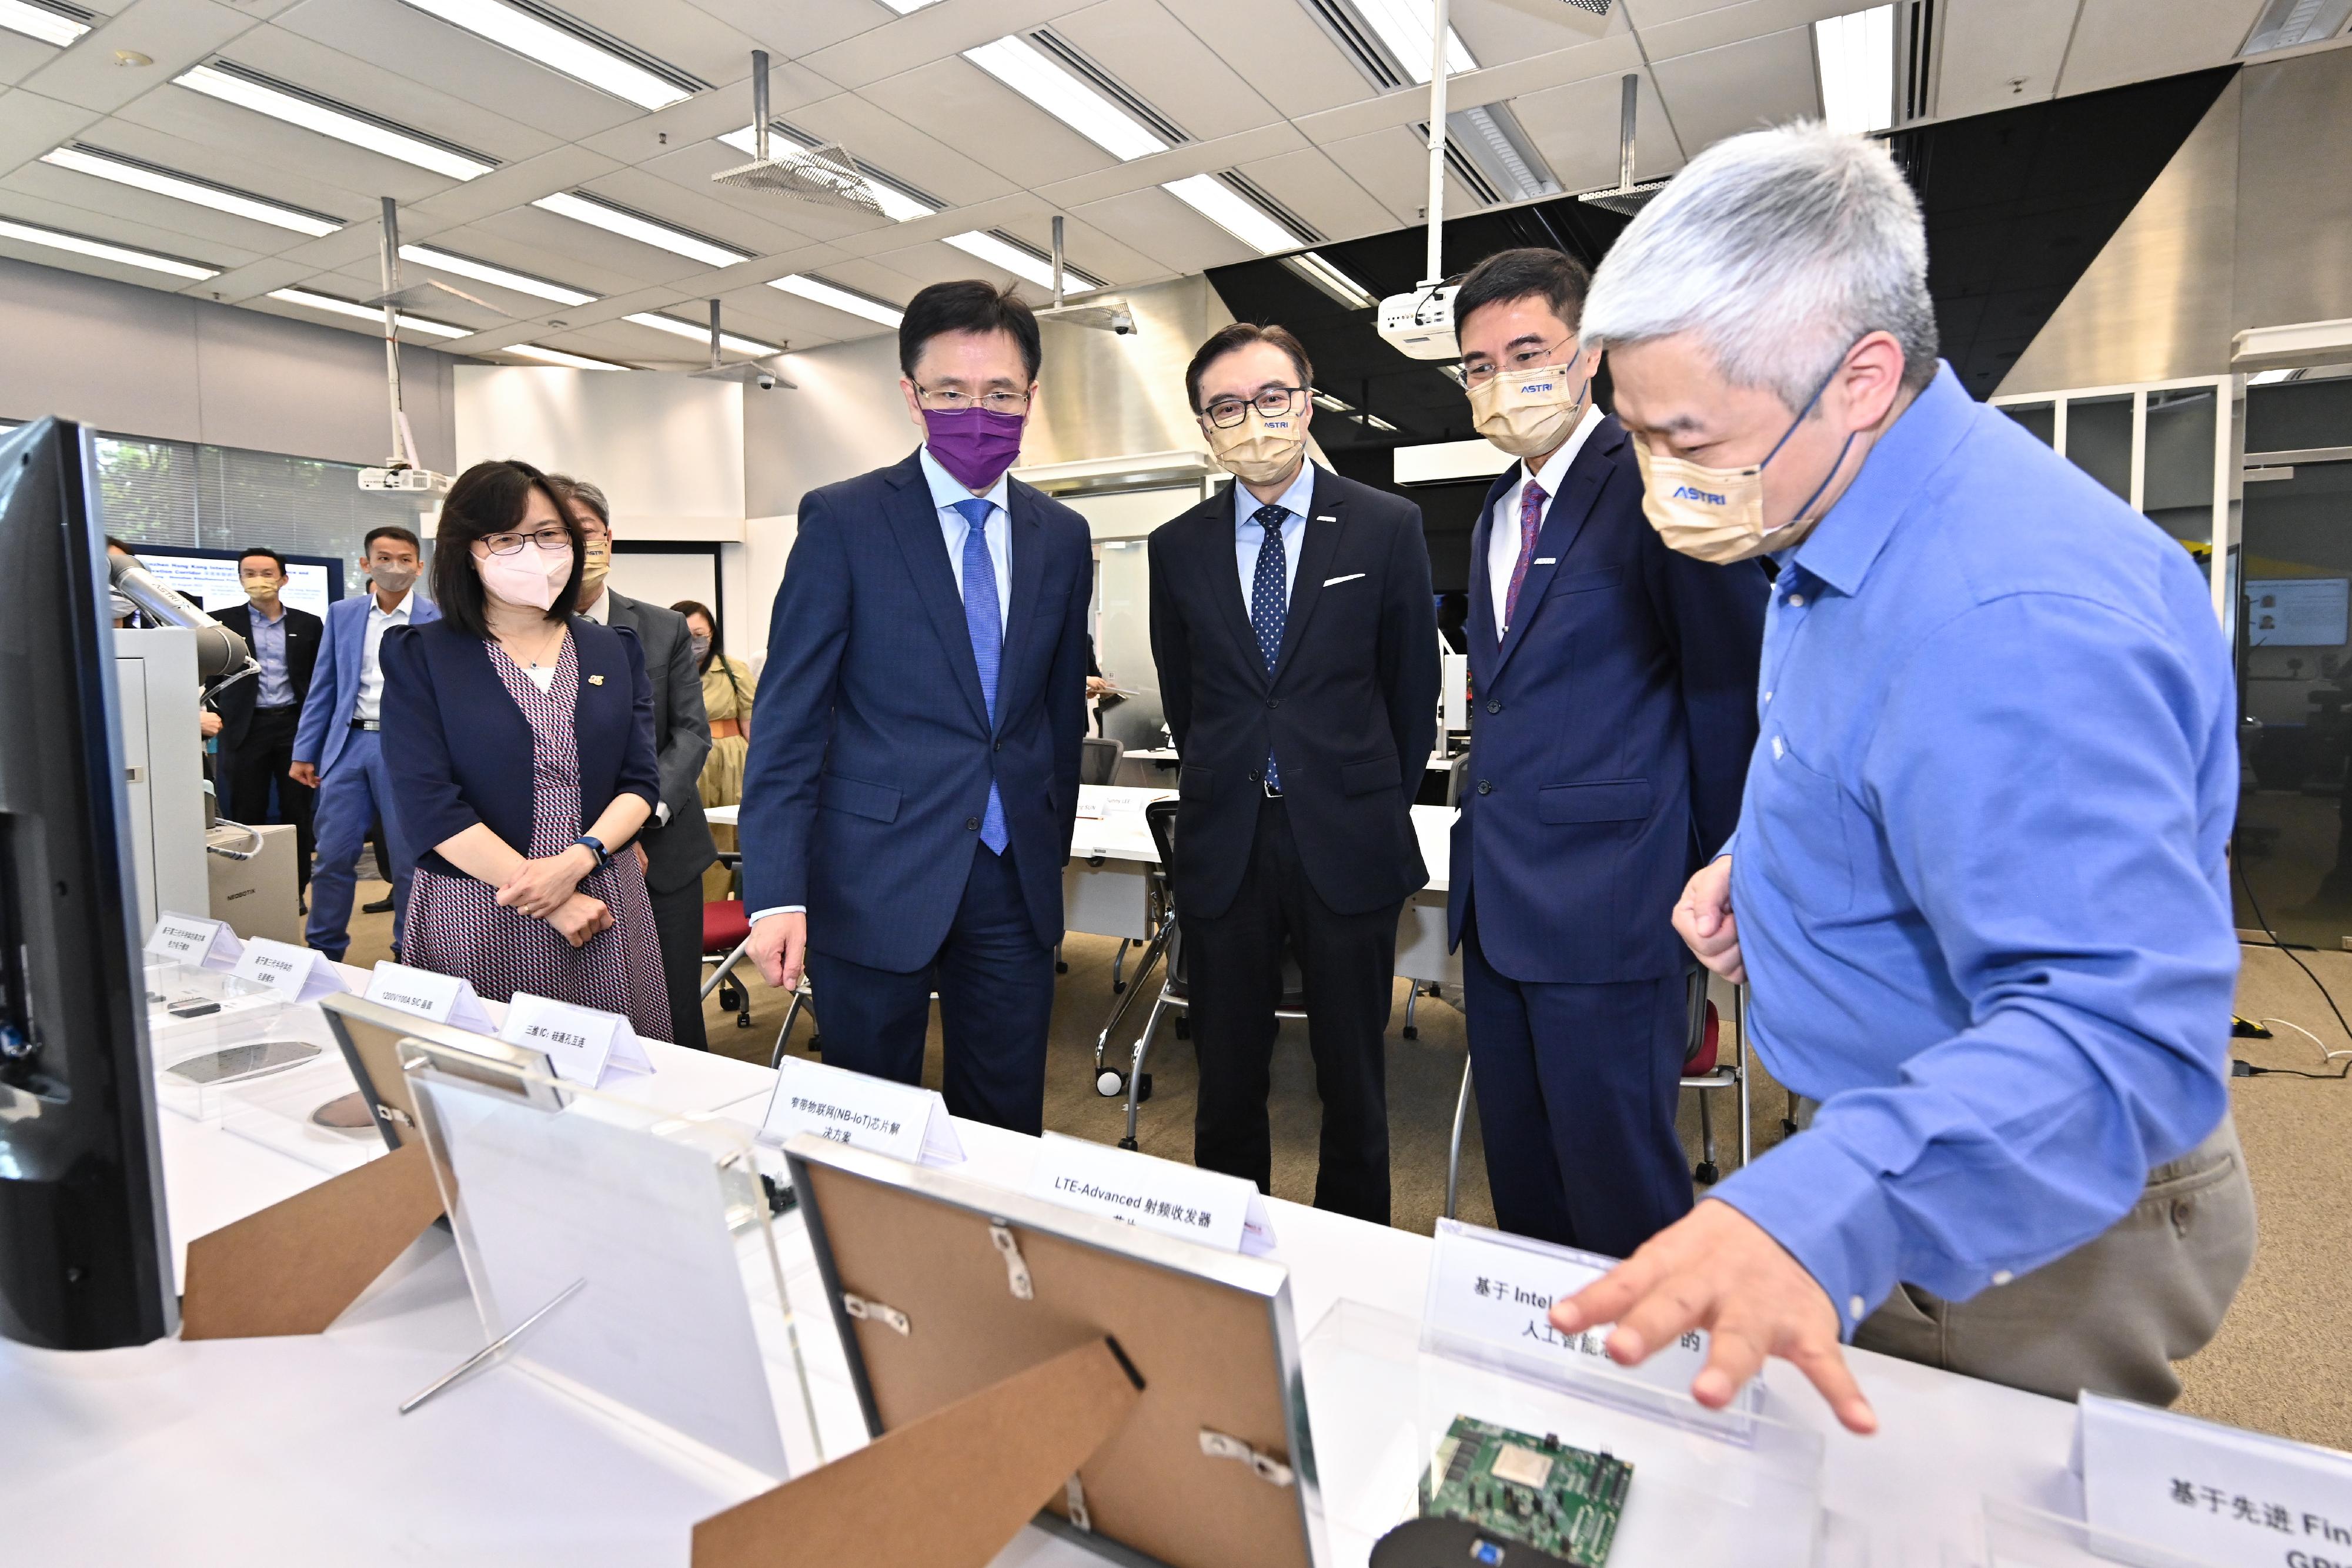 The Secretary for Innovation, Technology and Industry, Professor Sun Dong (second left), accompanied by the Commissioner for Innovation and Technology, Ms Rebecca Pun (first left), visits the Hong Kong Applied Science and Technology Research Institute (ASTRI) today (July 19) and receives a briefing on the work and R&D technologies of ASTRI. Looking on are the Chairman of ASTRI, Mr Sunny Lee (centre), and the Chief Executive Officer of ASTRI, Dr Denis Yip (second right).